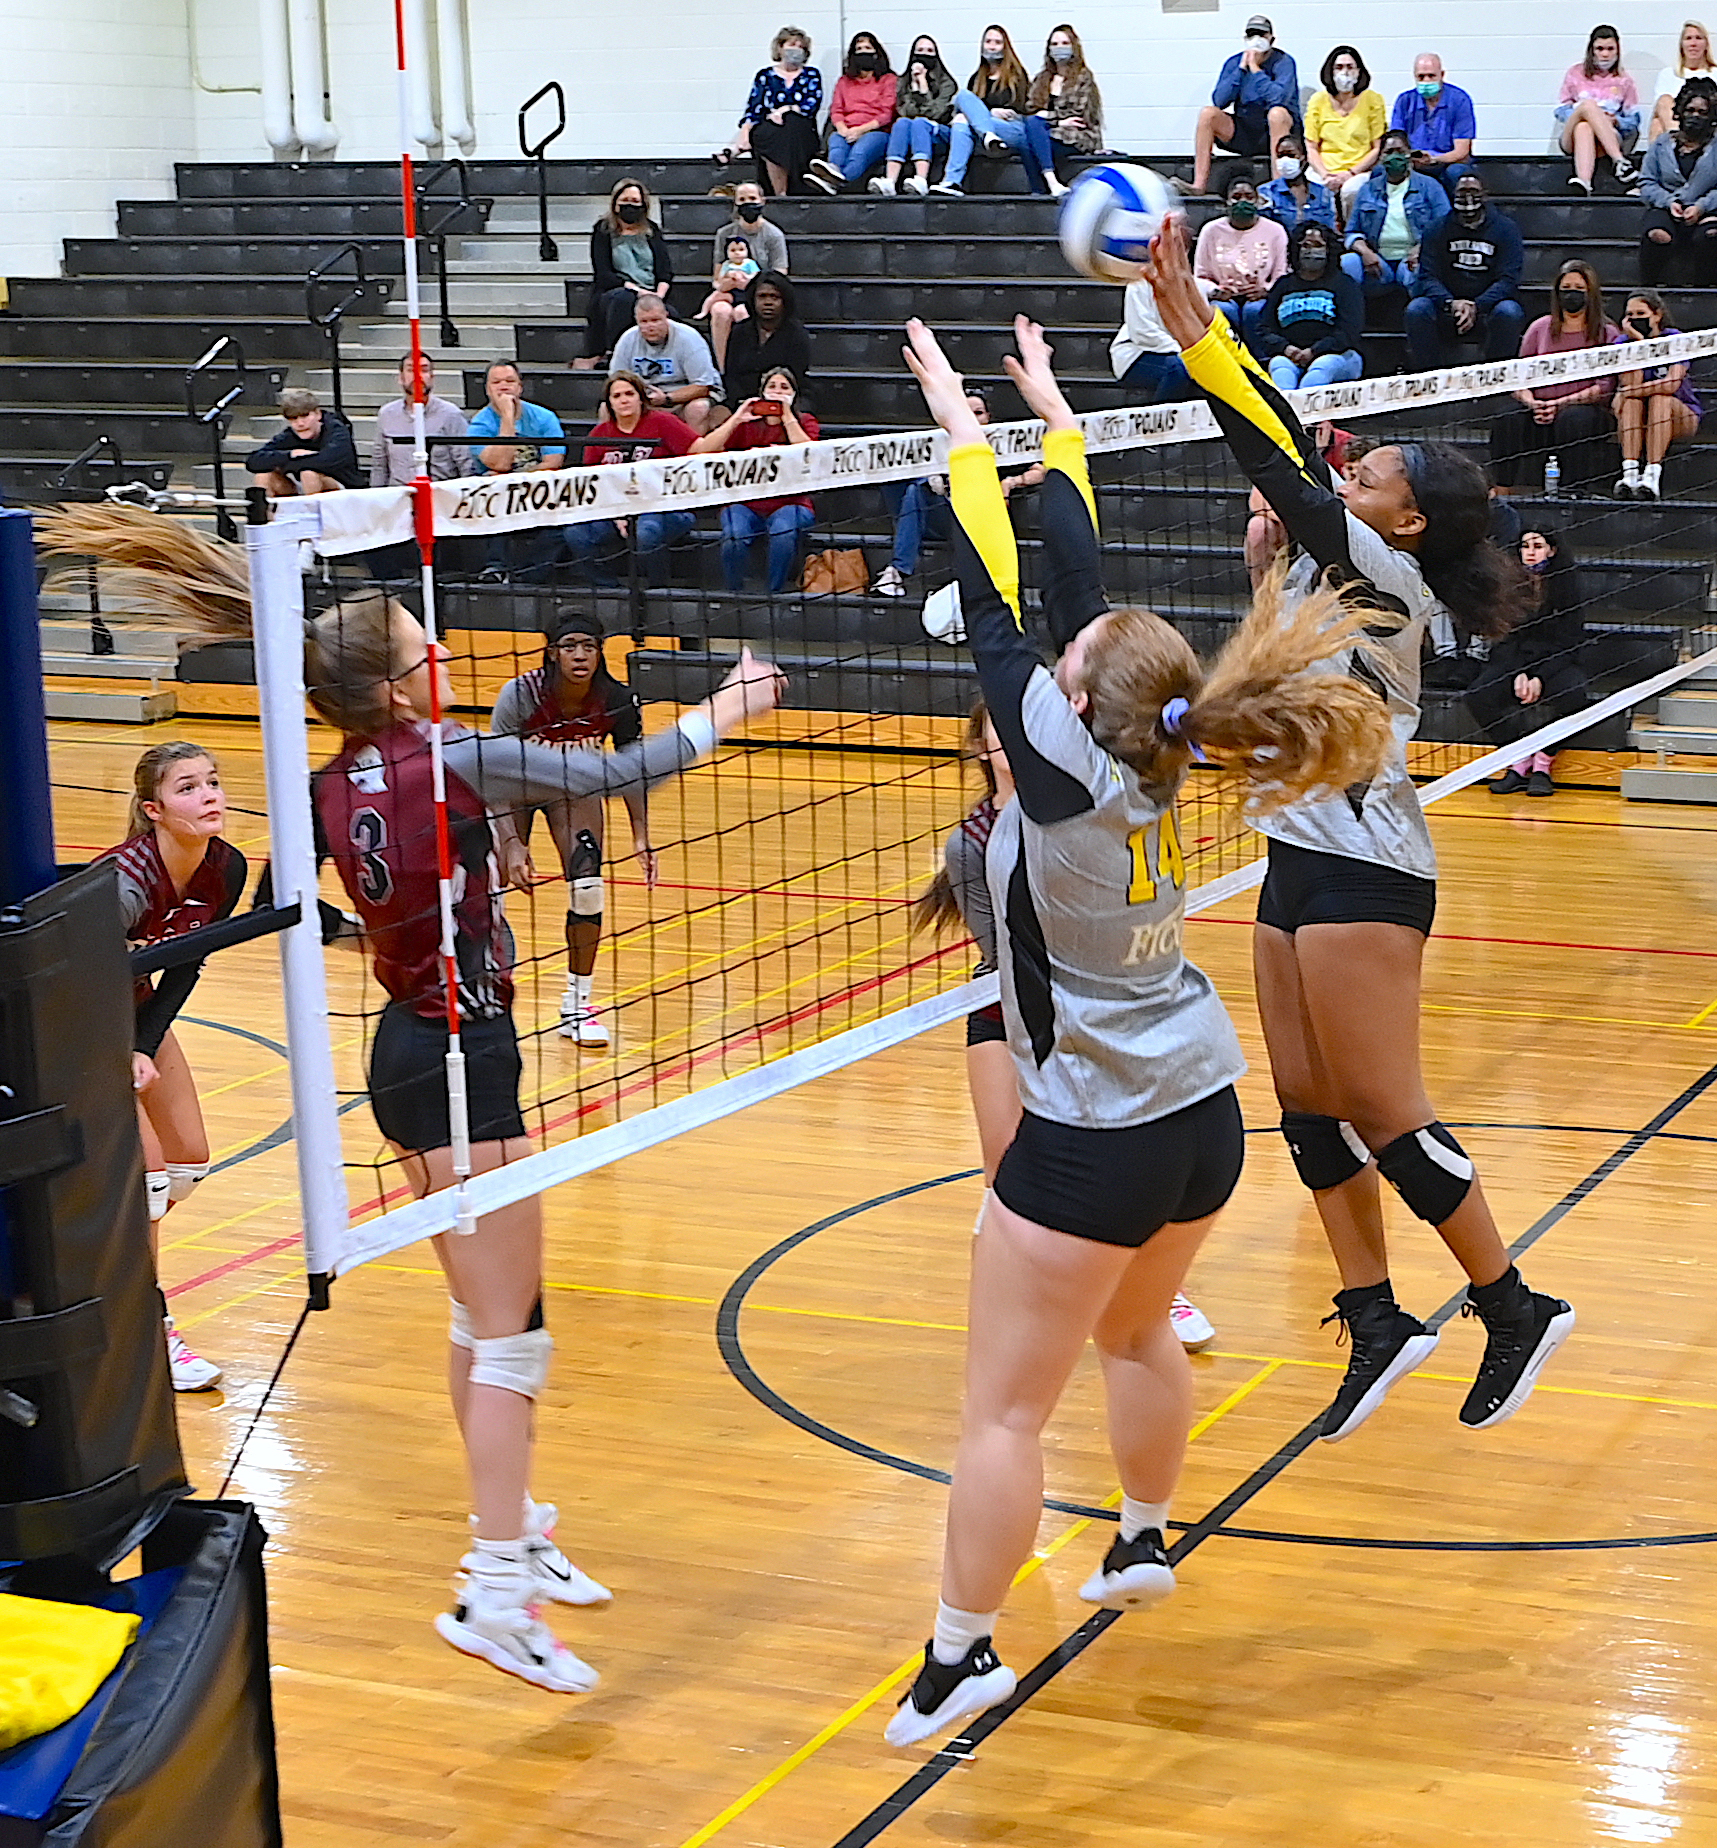 FTCC Volleyball vs USC Union - Oct. 22, 2021